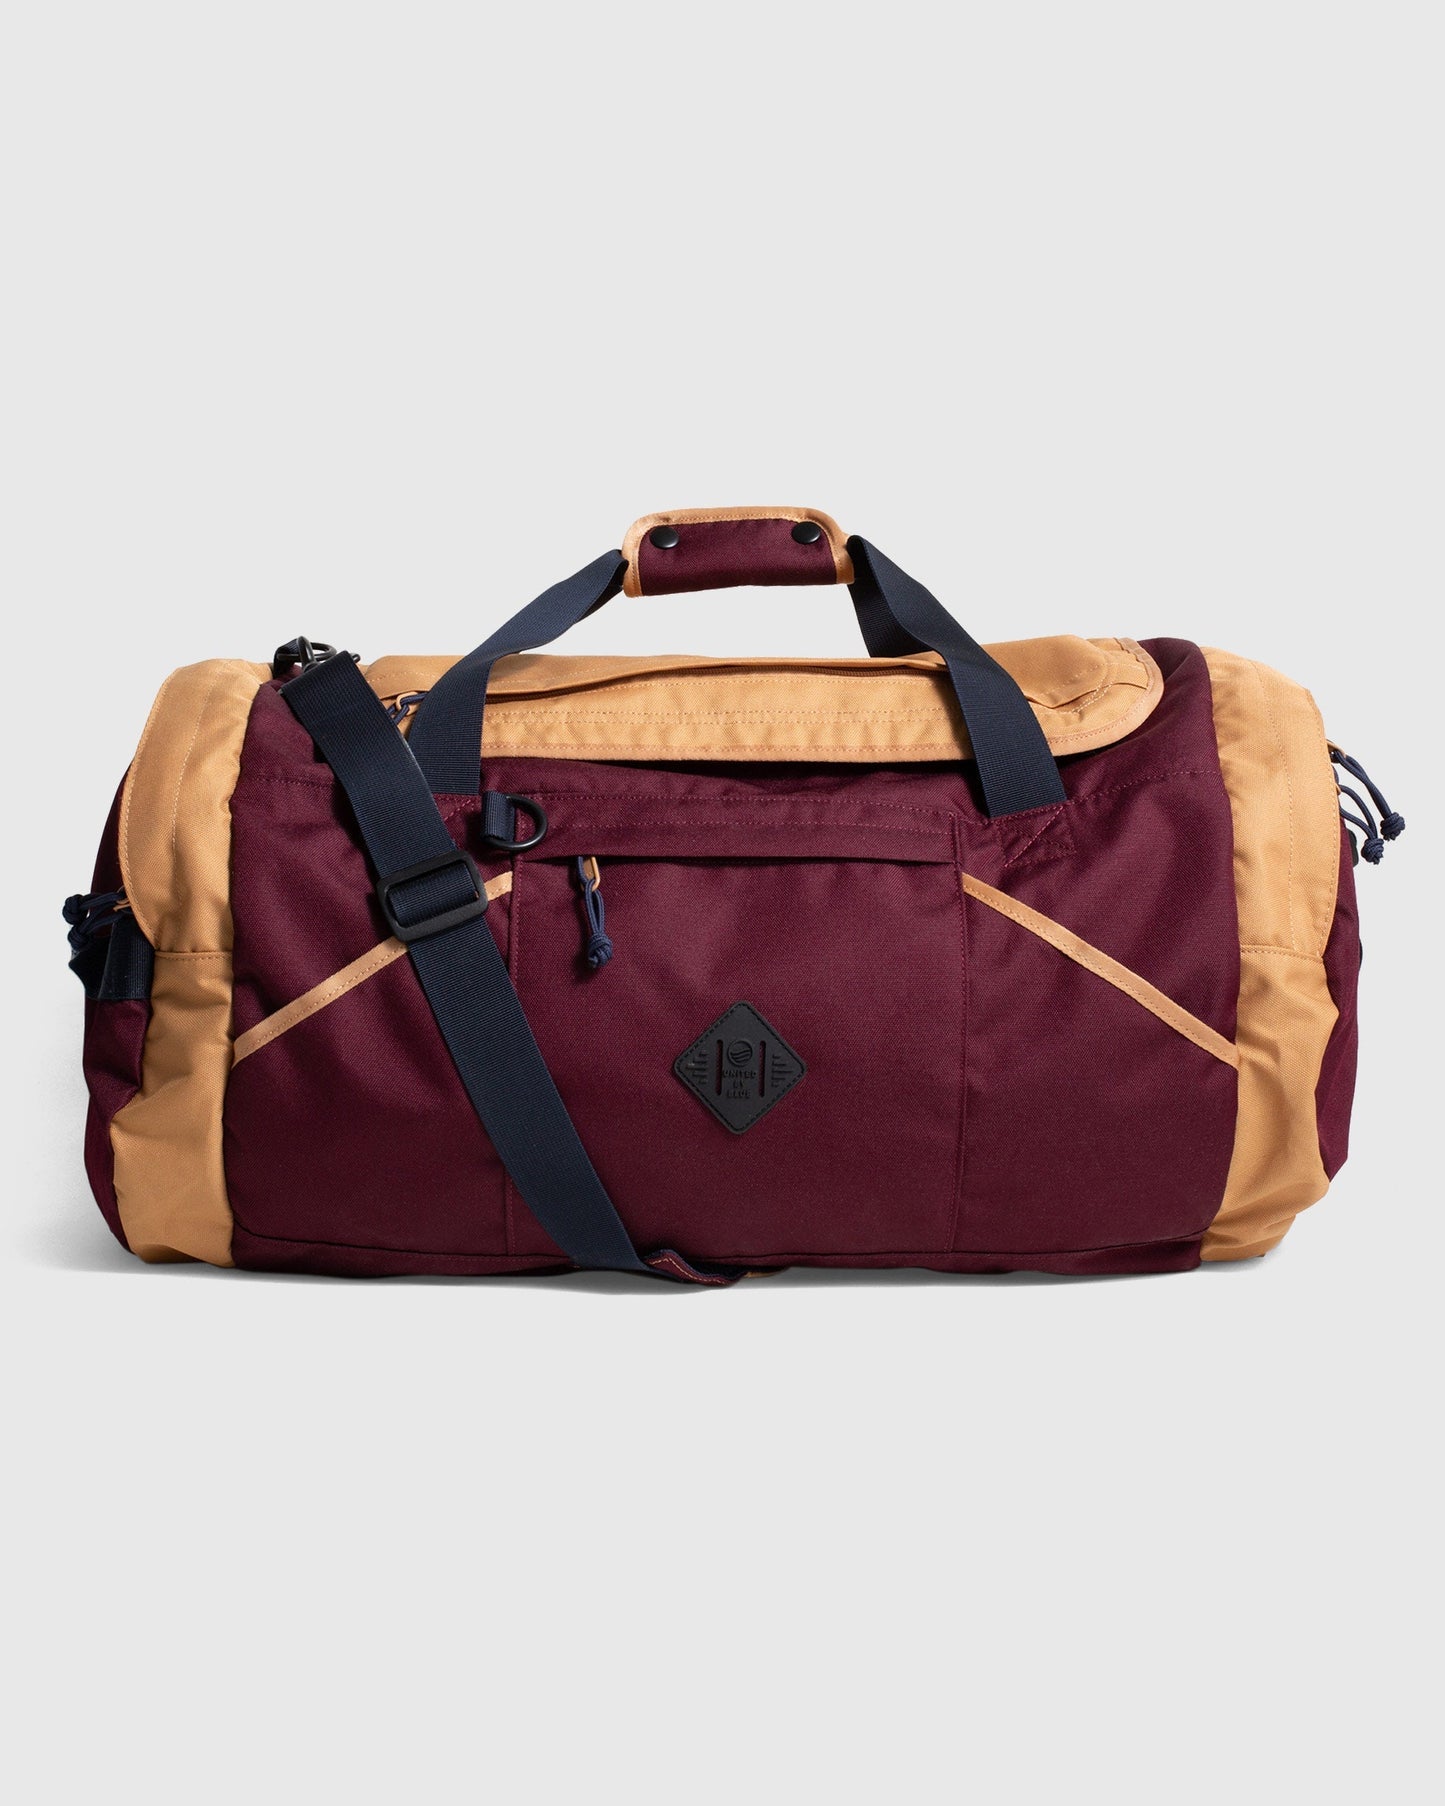 55L Carry-On Duffle *COLLECTIVE*